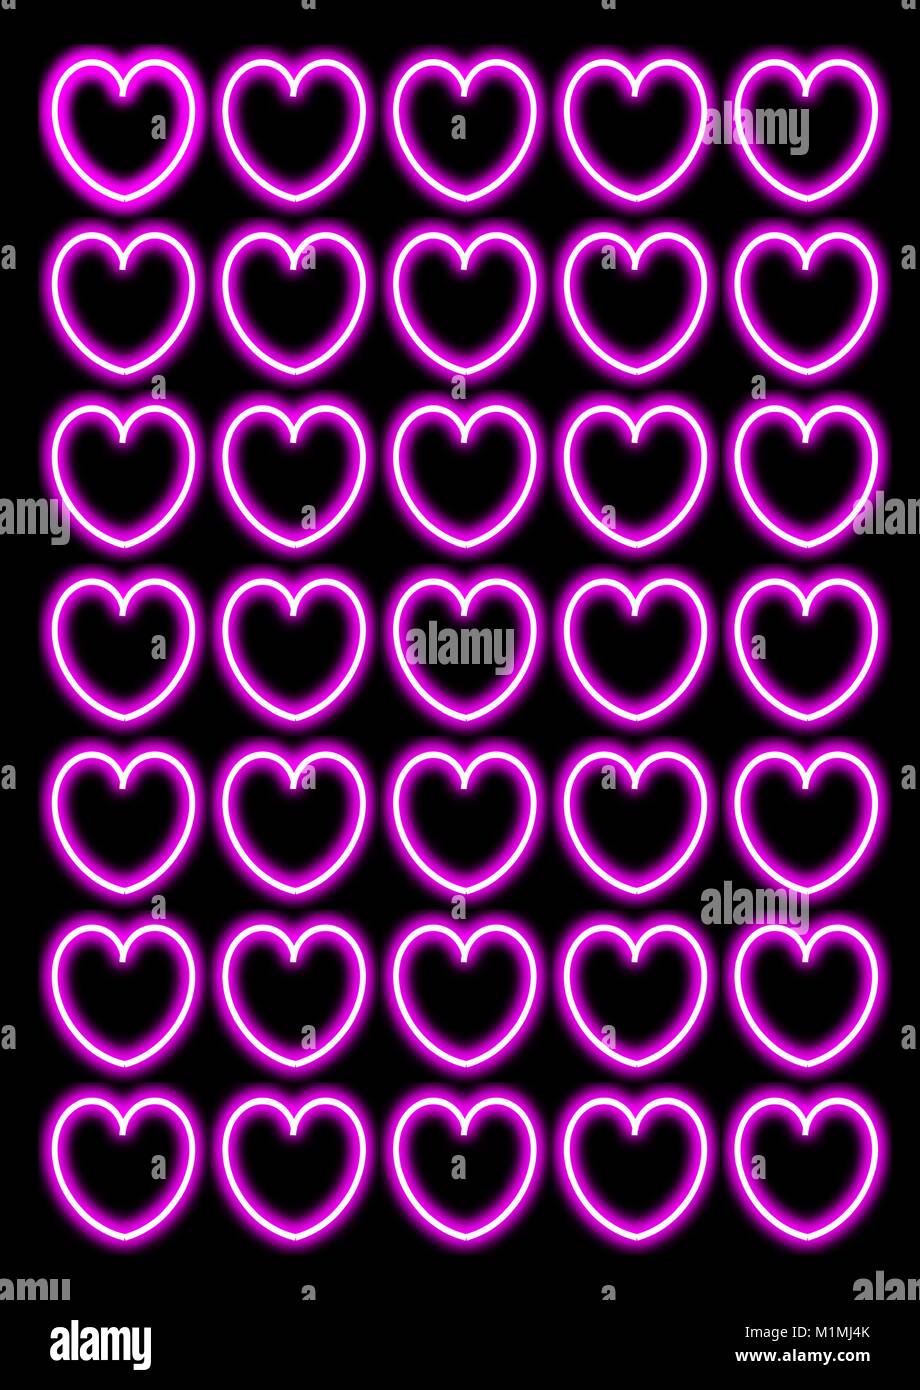 Bright Pink Neon Hearts On Plain Black Background Stock Vector Image & Art  - Alamy